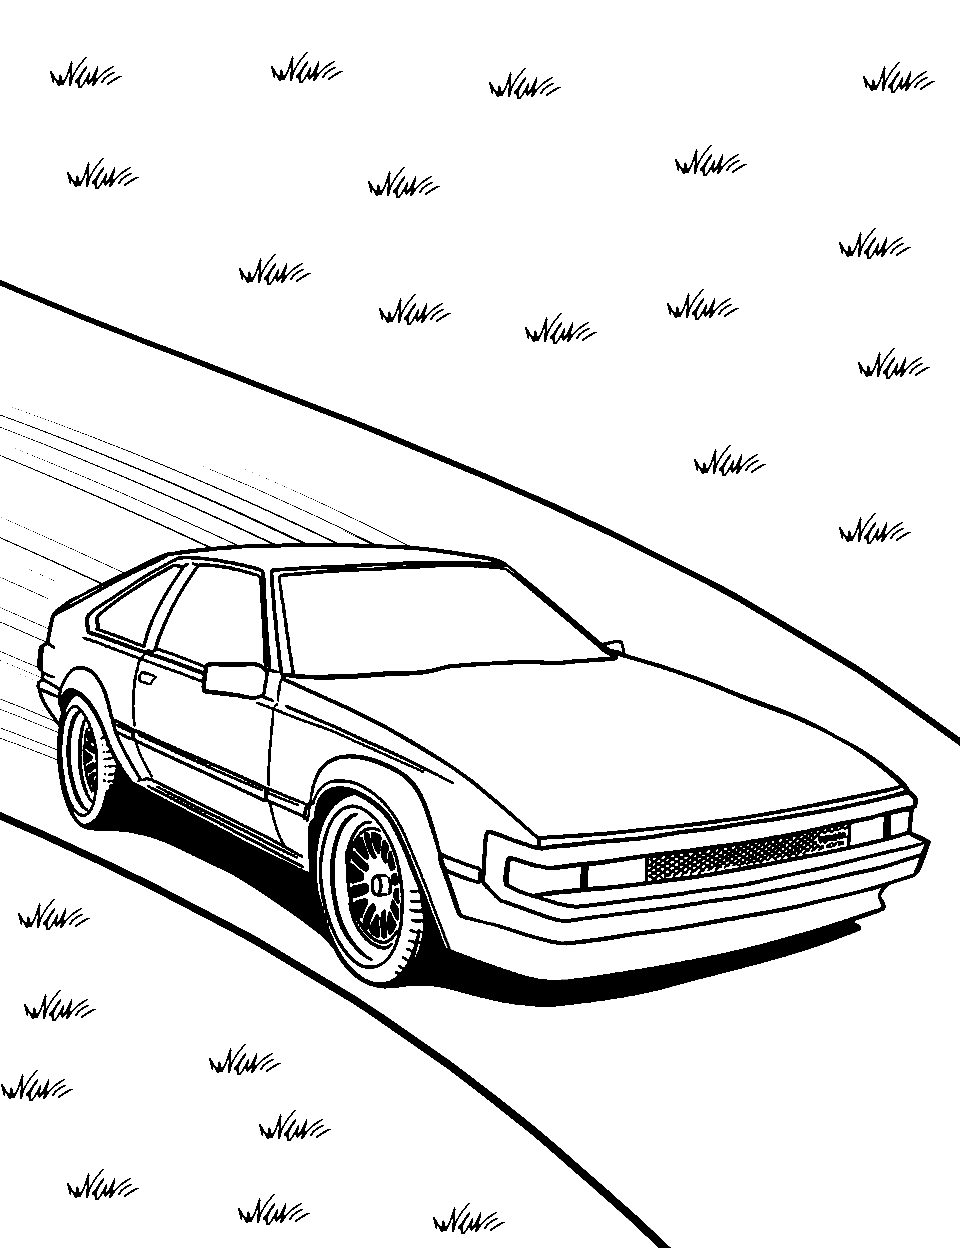 Prototype Frenzy Race Car Coloring Page - A Prototype race car speeding down a road.